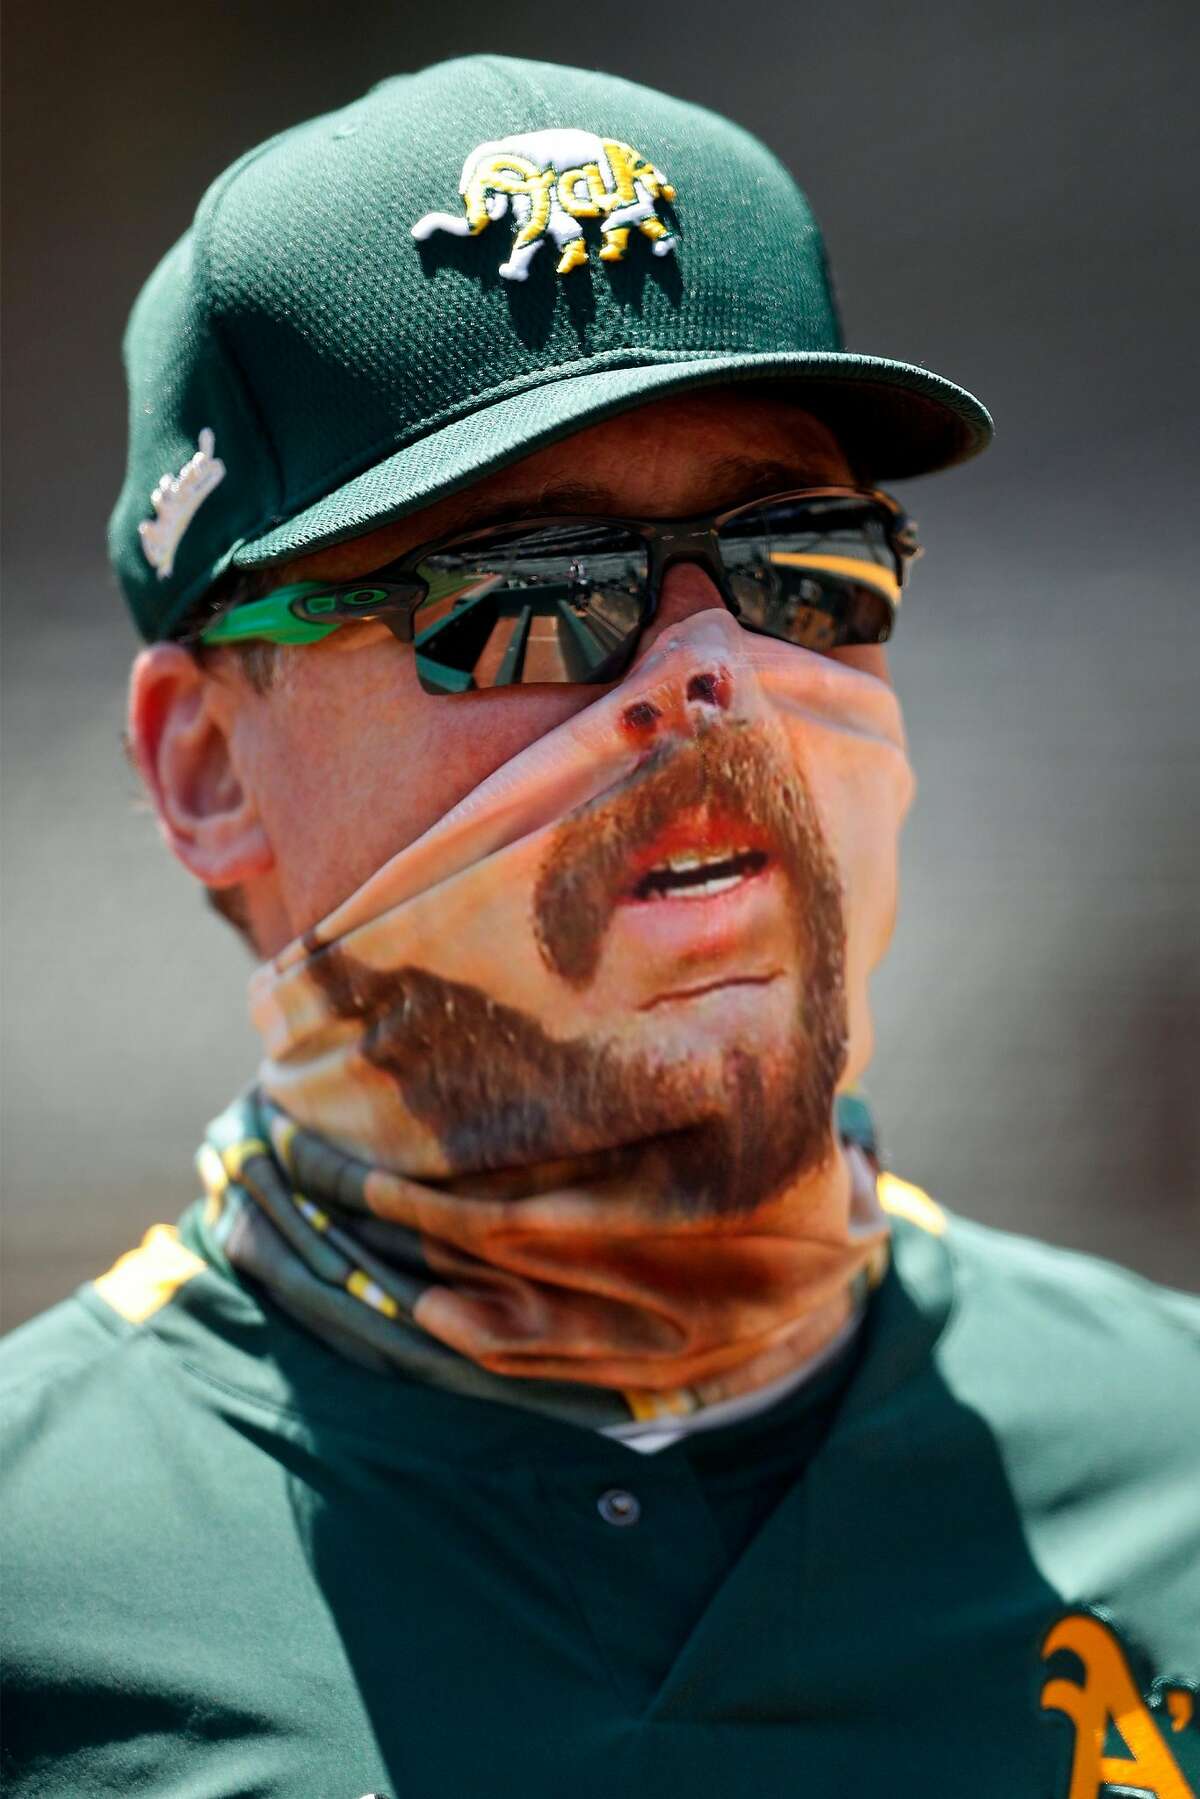 Oakland Athletics' manager Bob Melvin wears a mask imprinted with an image of pitcher Mike Fiers during practice at Oakland Coliseum in Oakland, Calif., on Wednesday, July 8, 2020.